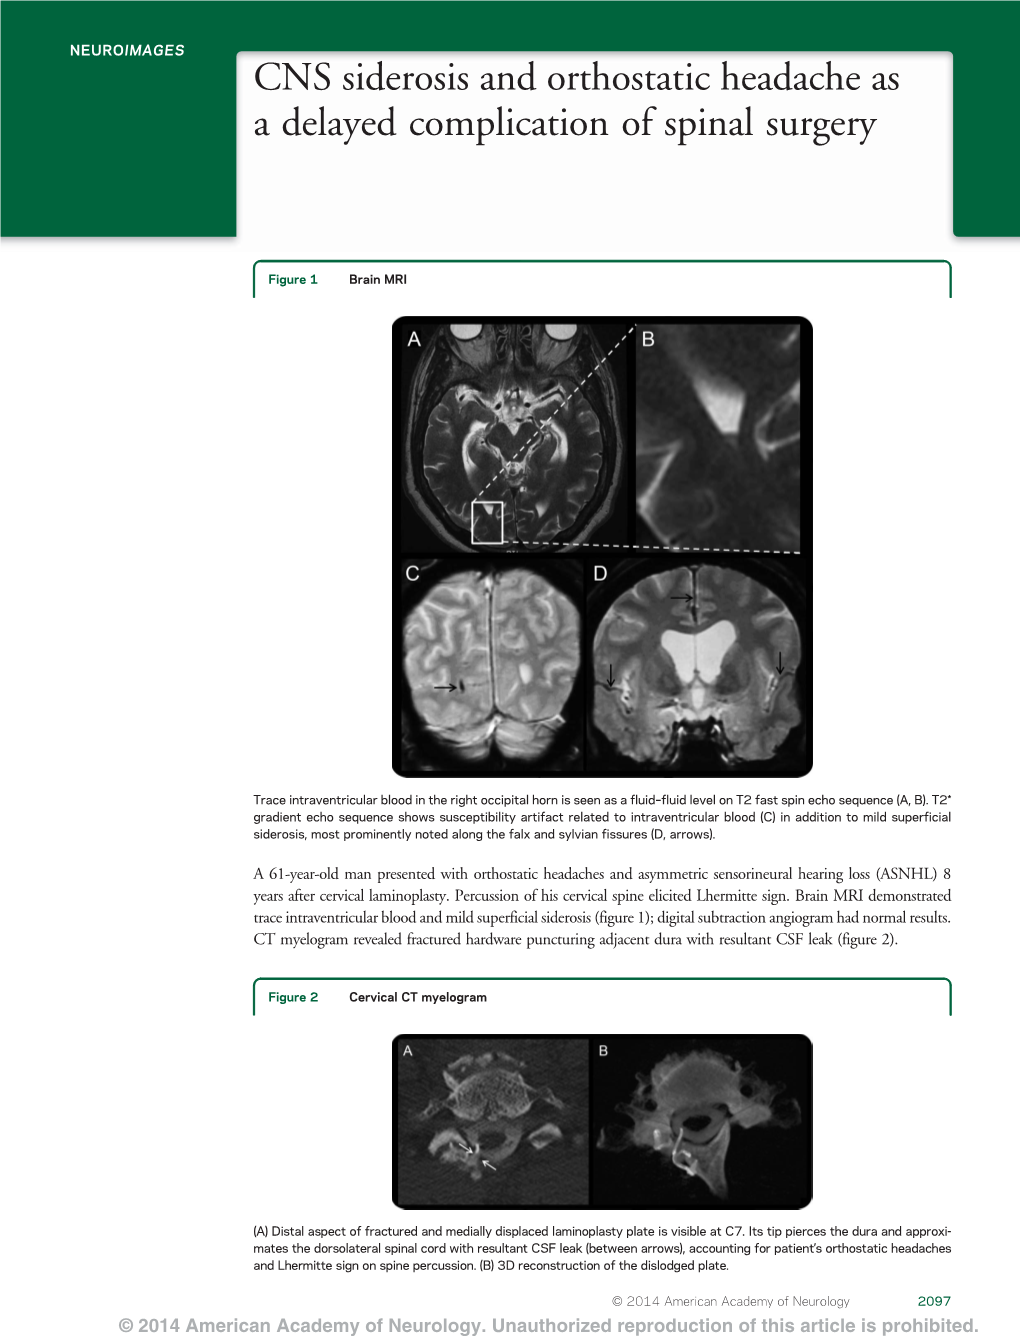 CNS Siderosis and Orthostatic Headache As a Delayed Complication of Spinal Surgery